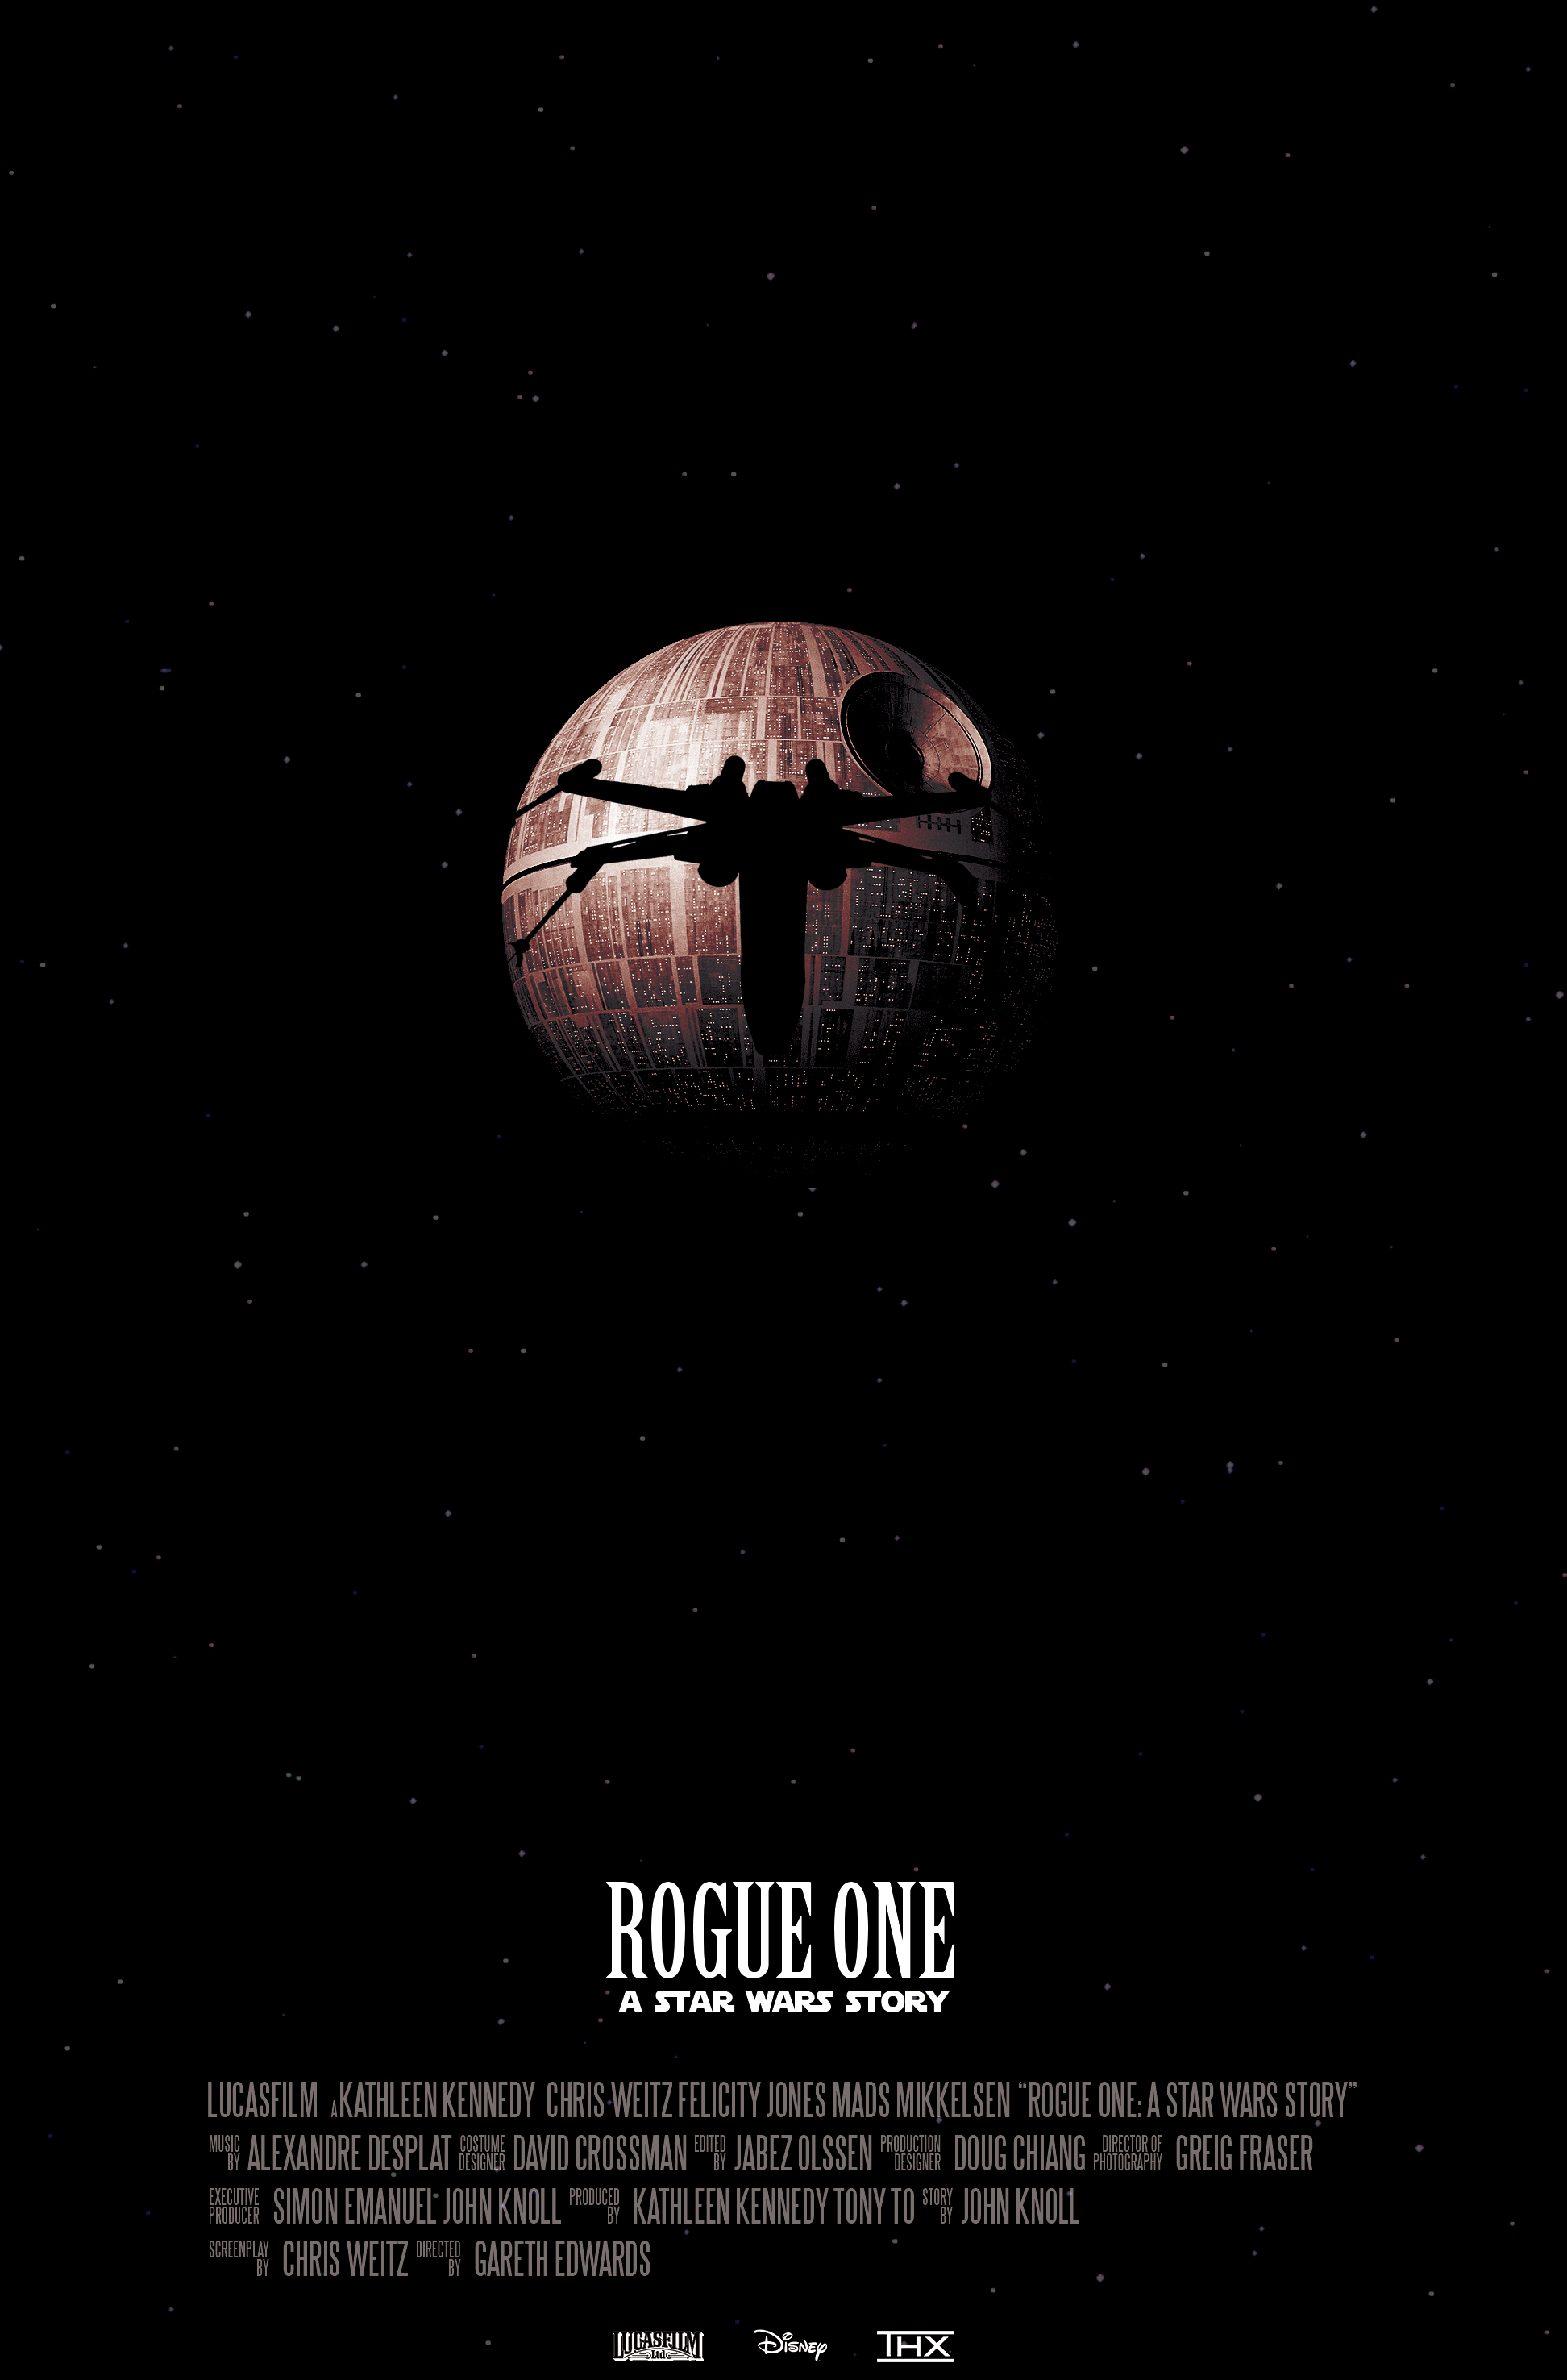 Film Watch Online 2016 Rogue One: A Star Wars Story